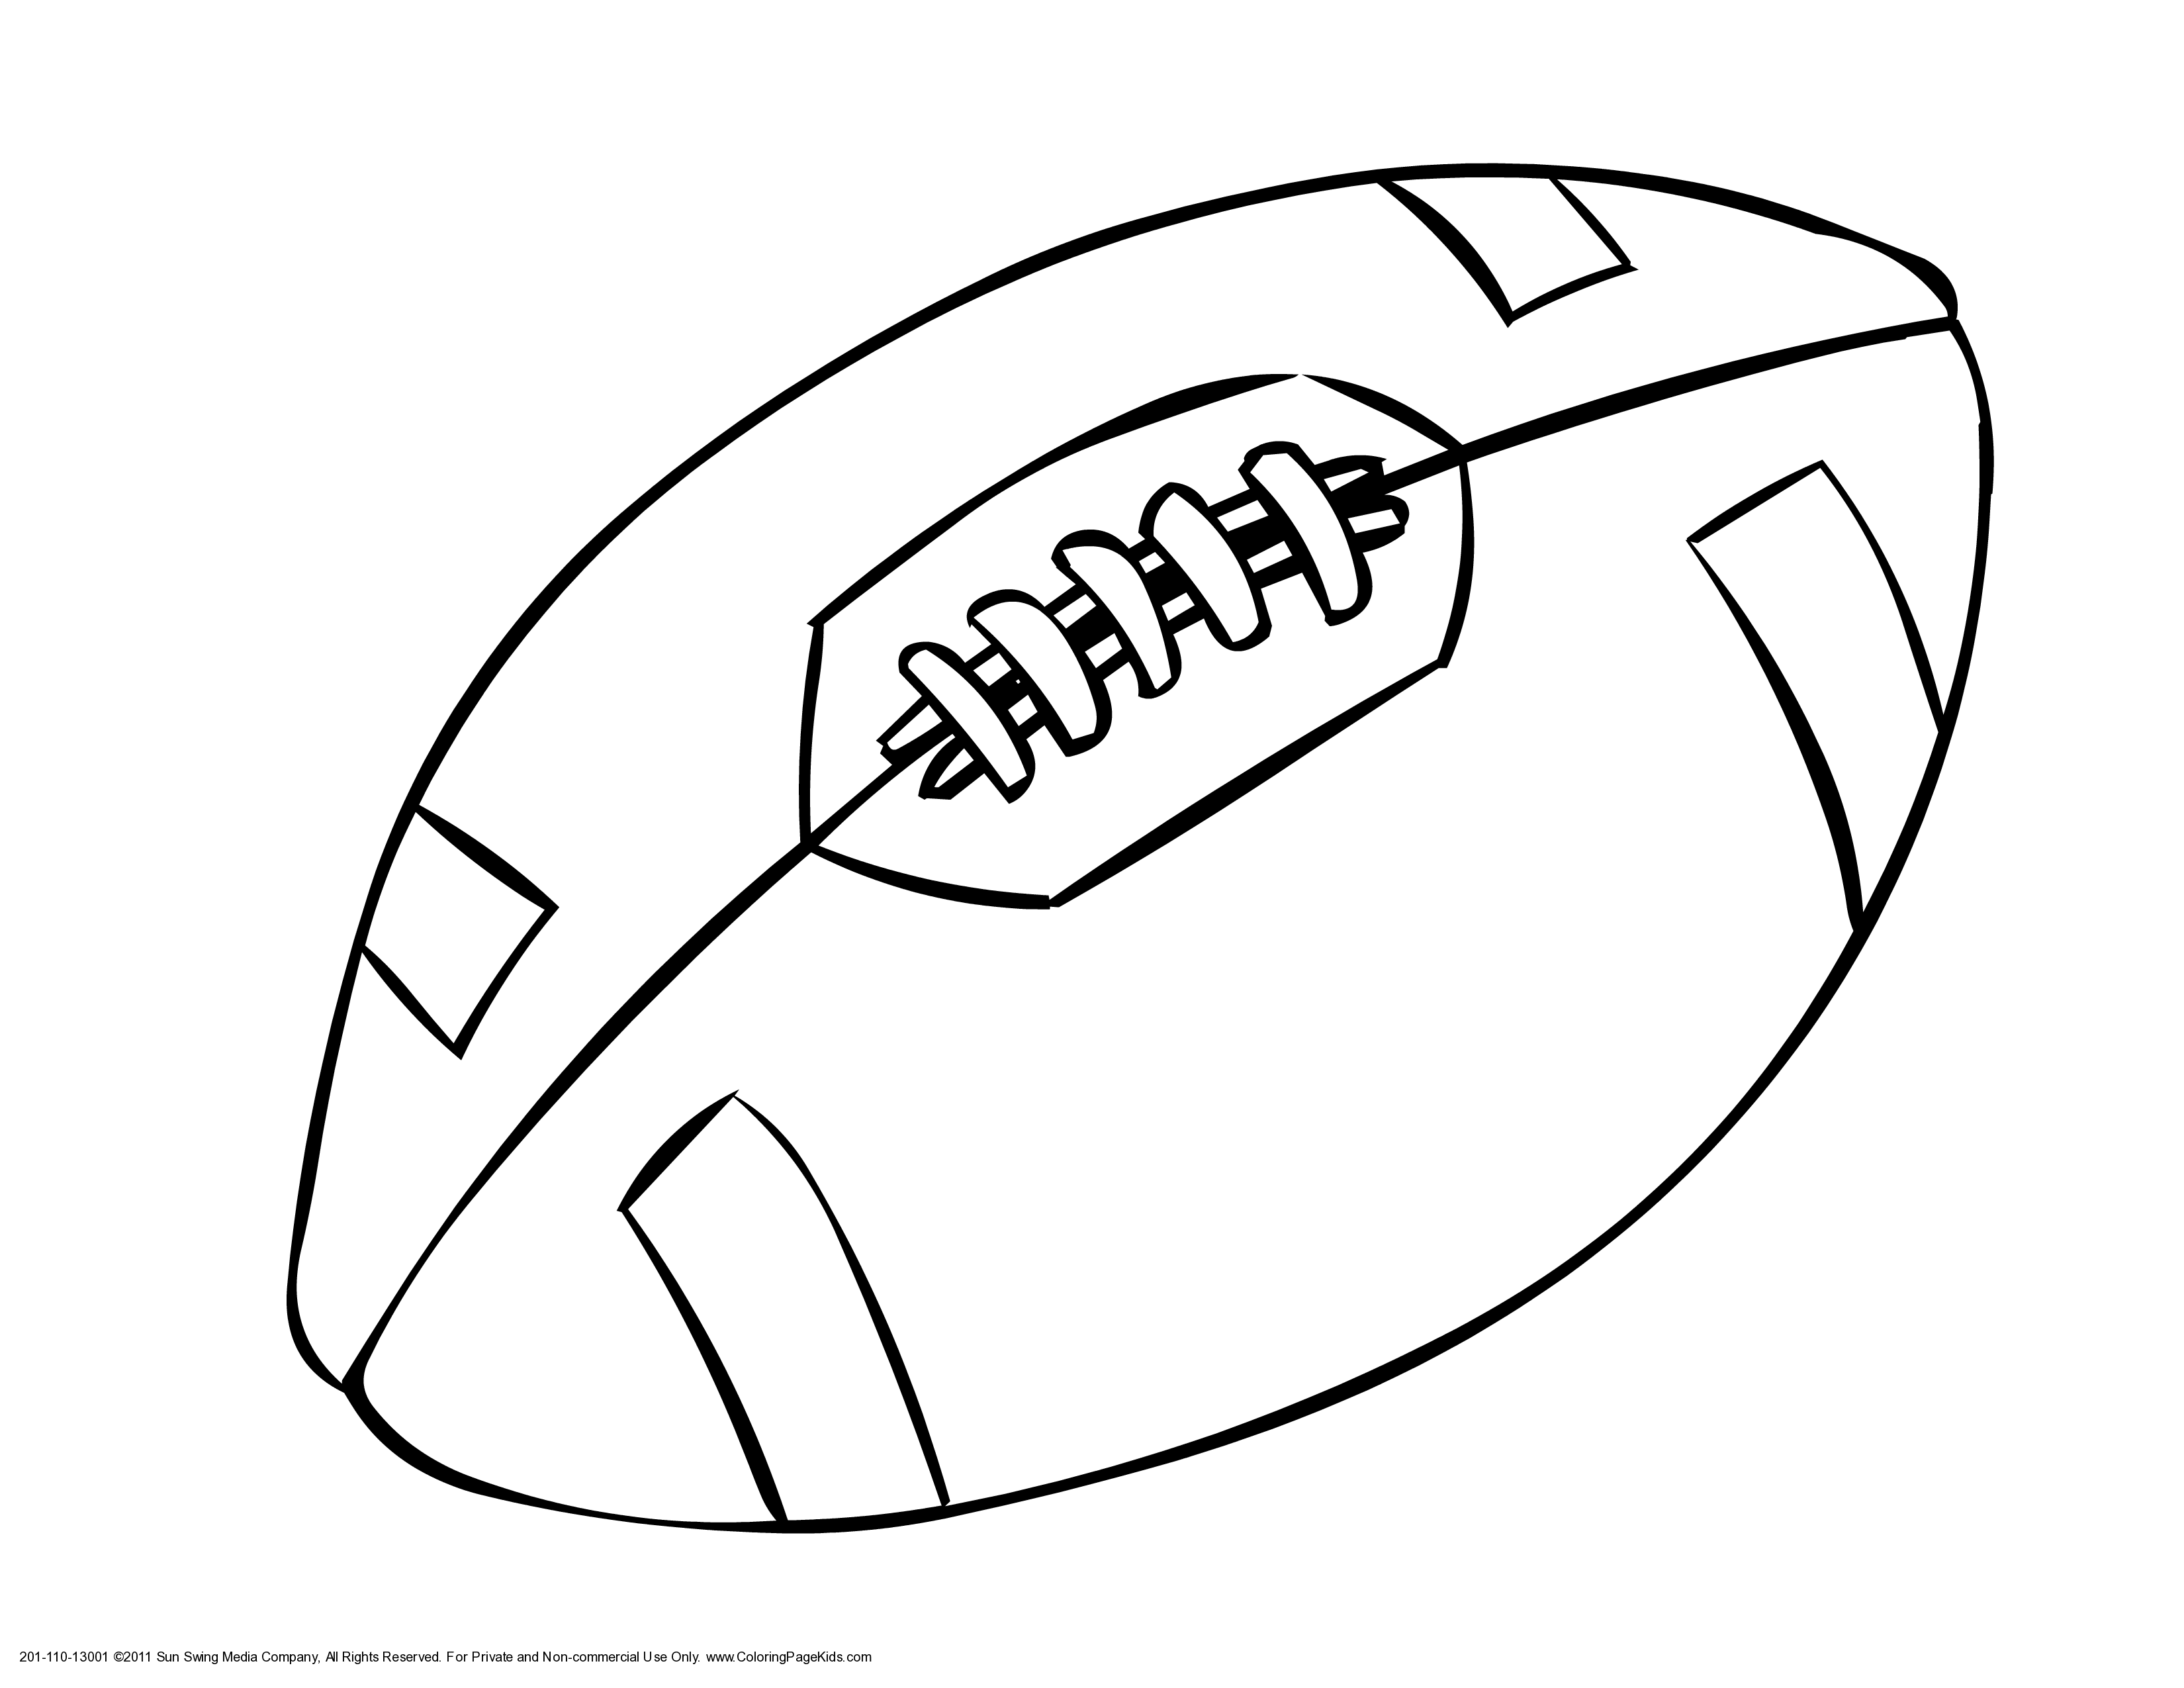 Batman Football Coloring Pages - Coloring Pages For All Ages